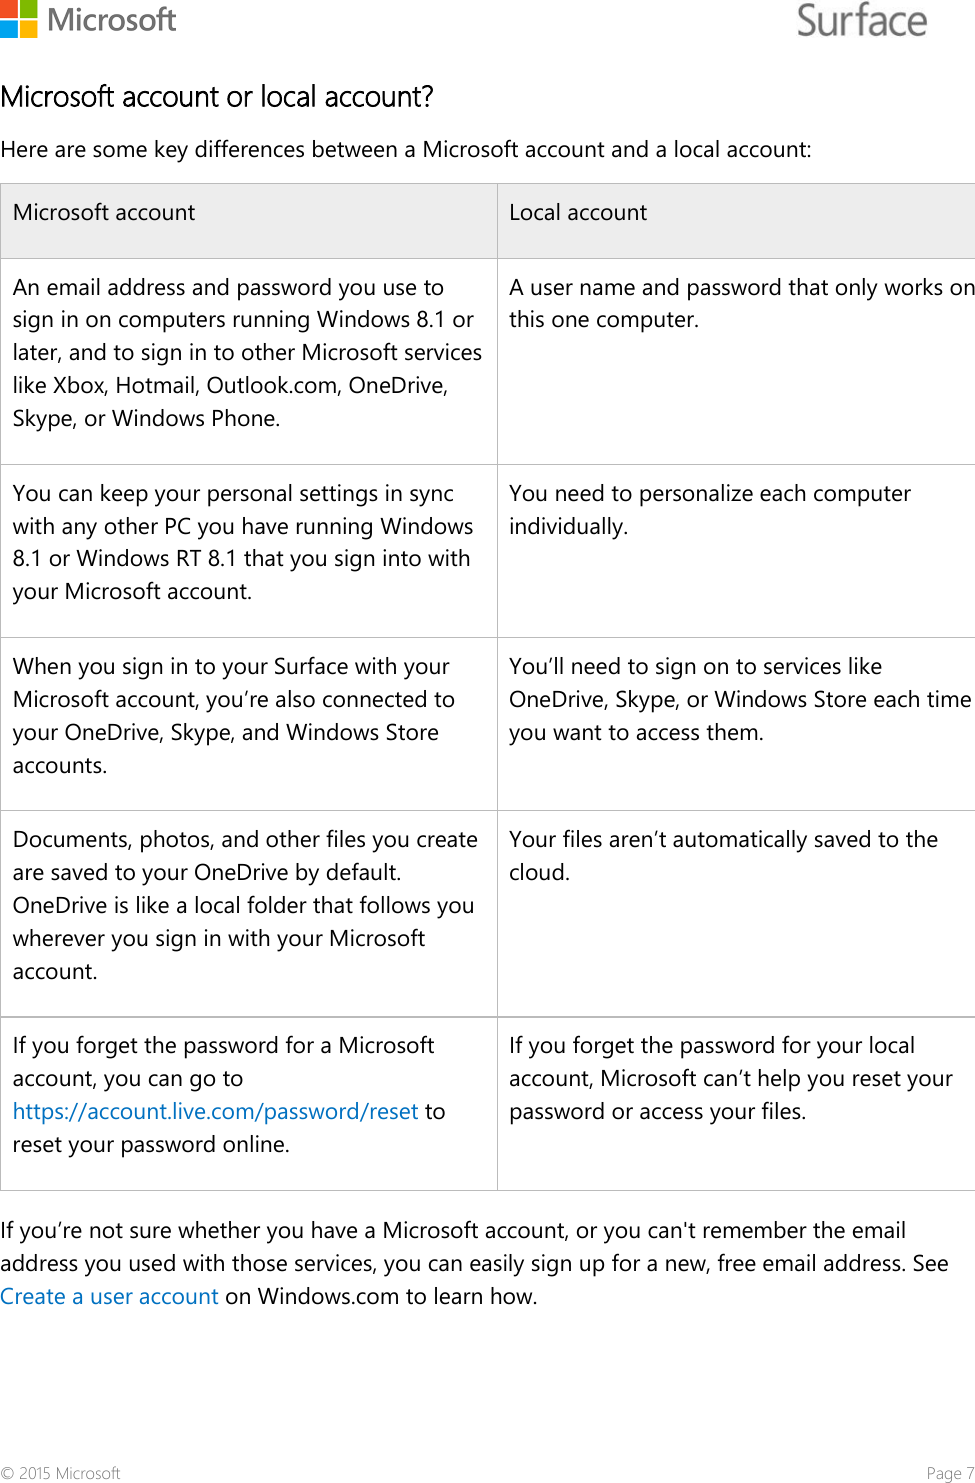    Microsoft account or local account? Here are some key differences between a Microsoft account and a local account: Microsoft account Local account  An email address and password you use to sign in on computers running Windows 8.1 or later, and to sign in to other Microsoft services like Xbox, Hotmail, Outlook.com, OneDrive, Skype, or Windows Phone. A user name and password that only works on this one computer. You can keep your personal settings in sync with any other PC you have running Windows 8.1 or Windows RT 8.1 that you sign into with your Microsoft account. You need to personalize each computer individually. When you sign in to your Surface with your Microsoft account, you’re also connected to your OneDrive, Skype, and Windows Store accounts. You’ll need to sign on to services like OneDrive, Skype, or Windows Store each time you want to access them. Documents, photos, and other files you create are saved to your OneDrive by default. OneDrive is like a local folder that follows you wherever you sign in with your Microsoft account. Your files aren’t automatically saved to the cloud. If you forget the password for a Microsoft account, you can go to https://account.live.com/password/reset to reset your password online. If you forget the password for your local account, Microsoft can’t help you reset your password or access your files.  If you’re not sure whether you have a Microsoft account, or you can&apos;t remember the email address you used with those services, you can easily sign up for a new, free email address. See Create a user account on Windows.com to learn how. © 2015 Microsoft    Page 7 